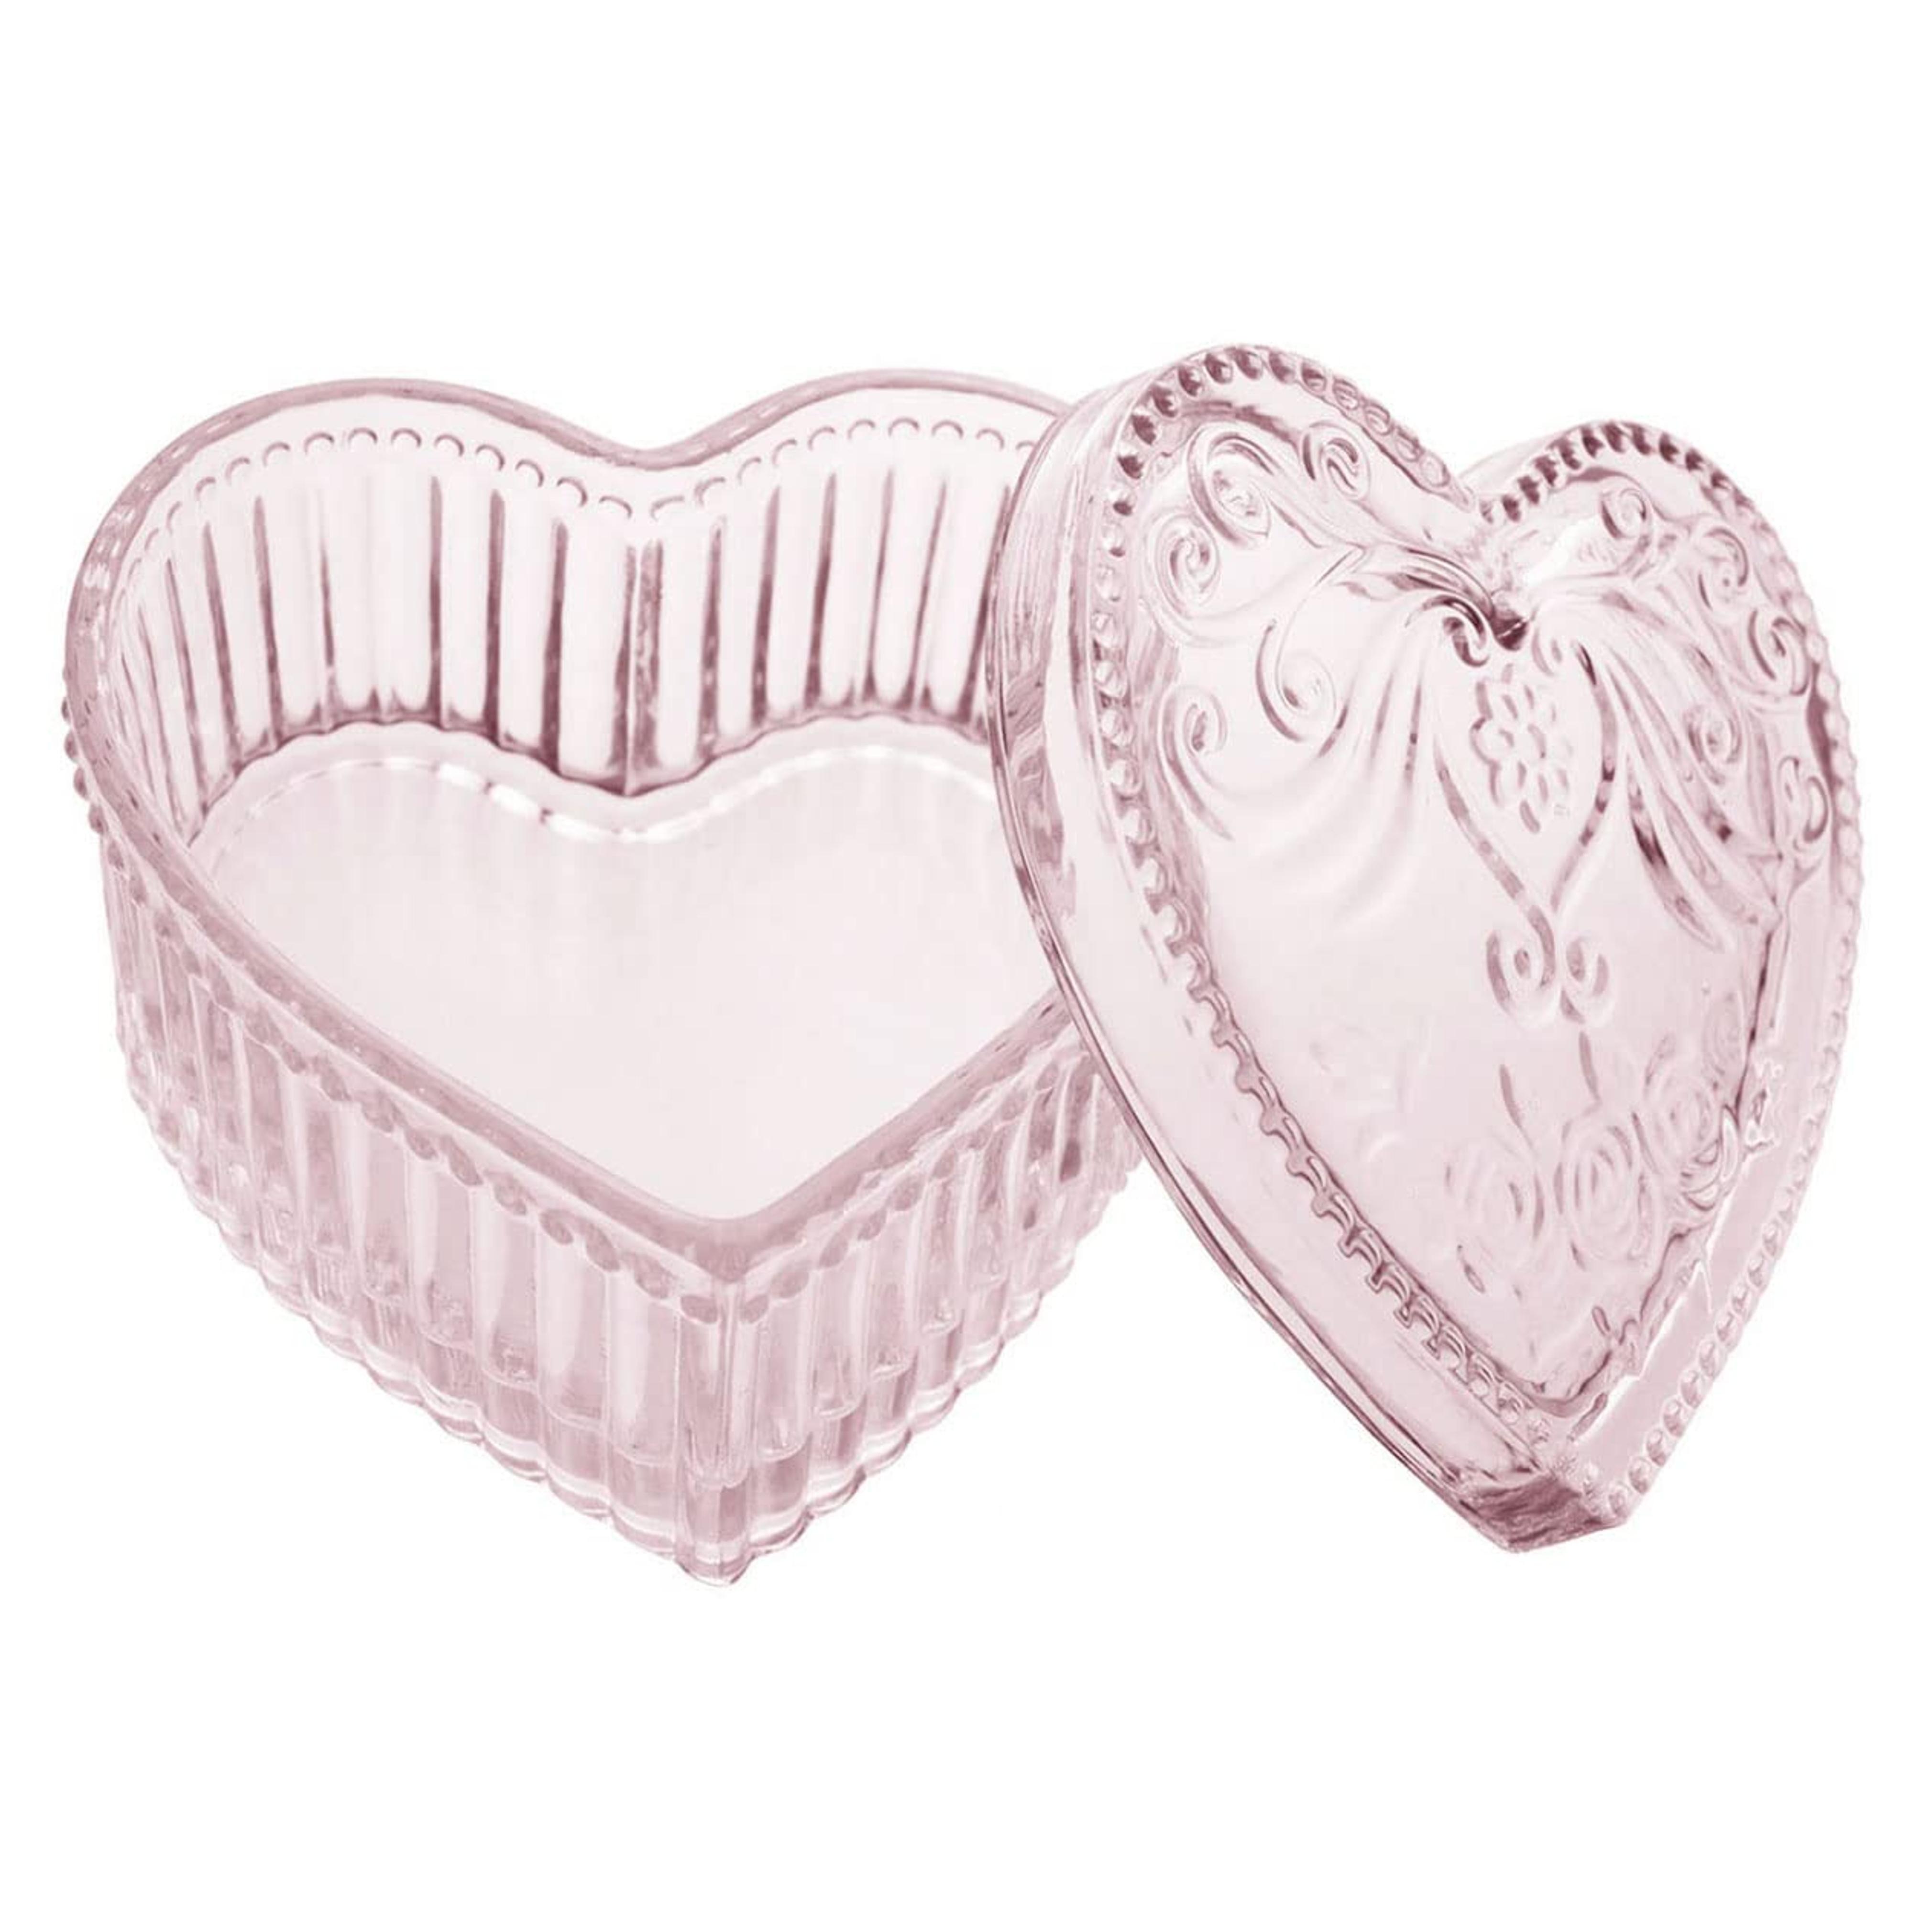 Amazon.com: Gaolinci Crystal Glass Heart-Shaped Storage Box Embossed Jewelry Box Candy Box with Lid : Home & Kitchen